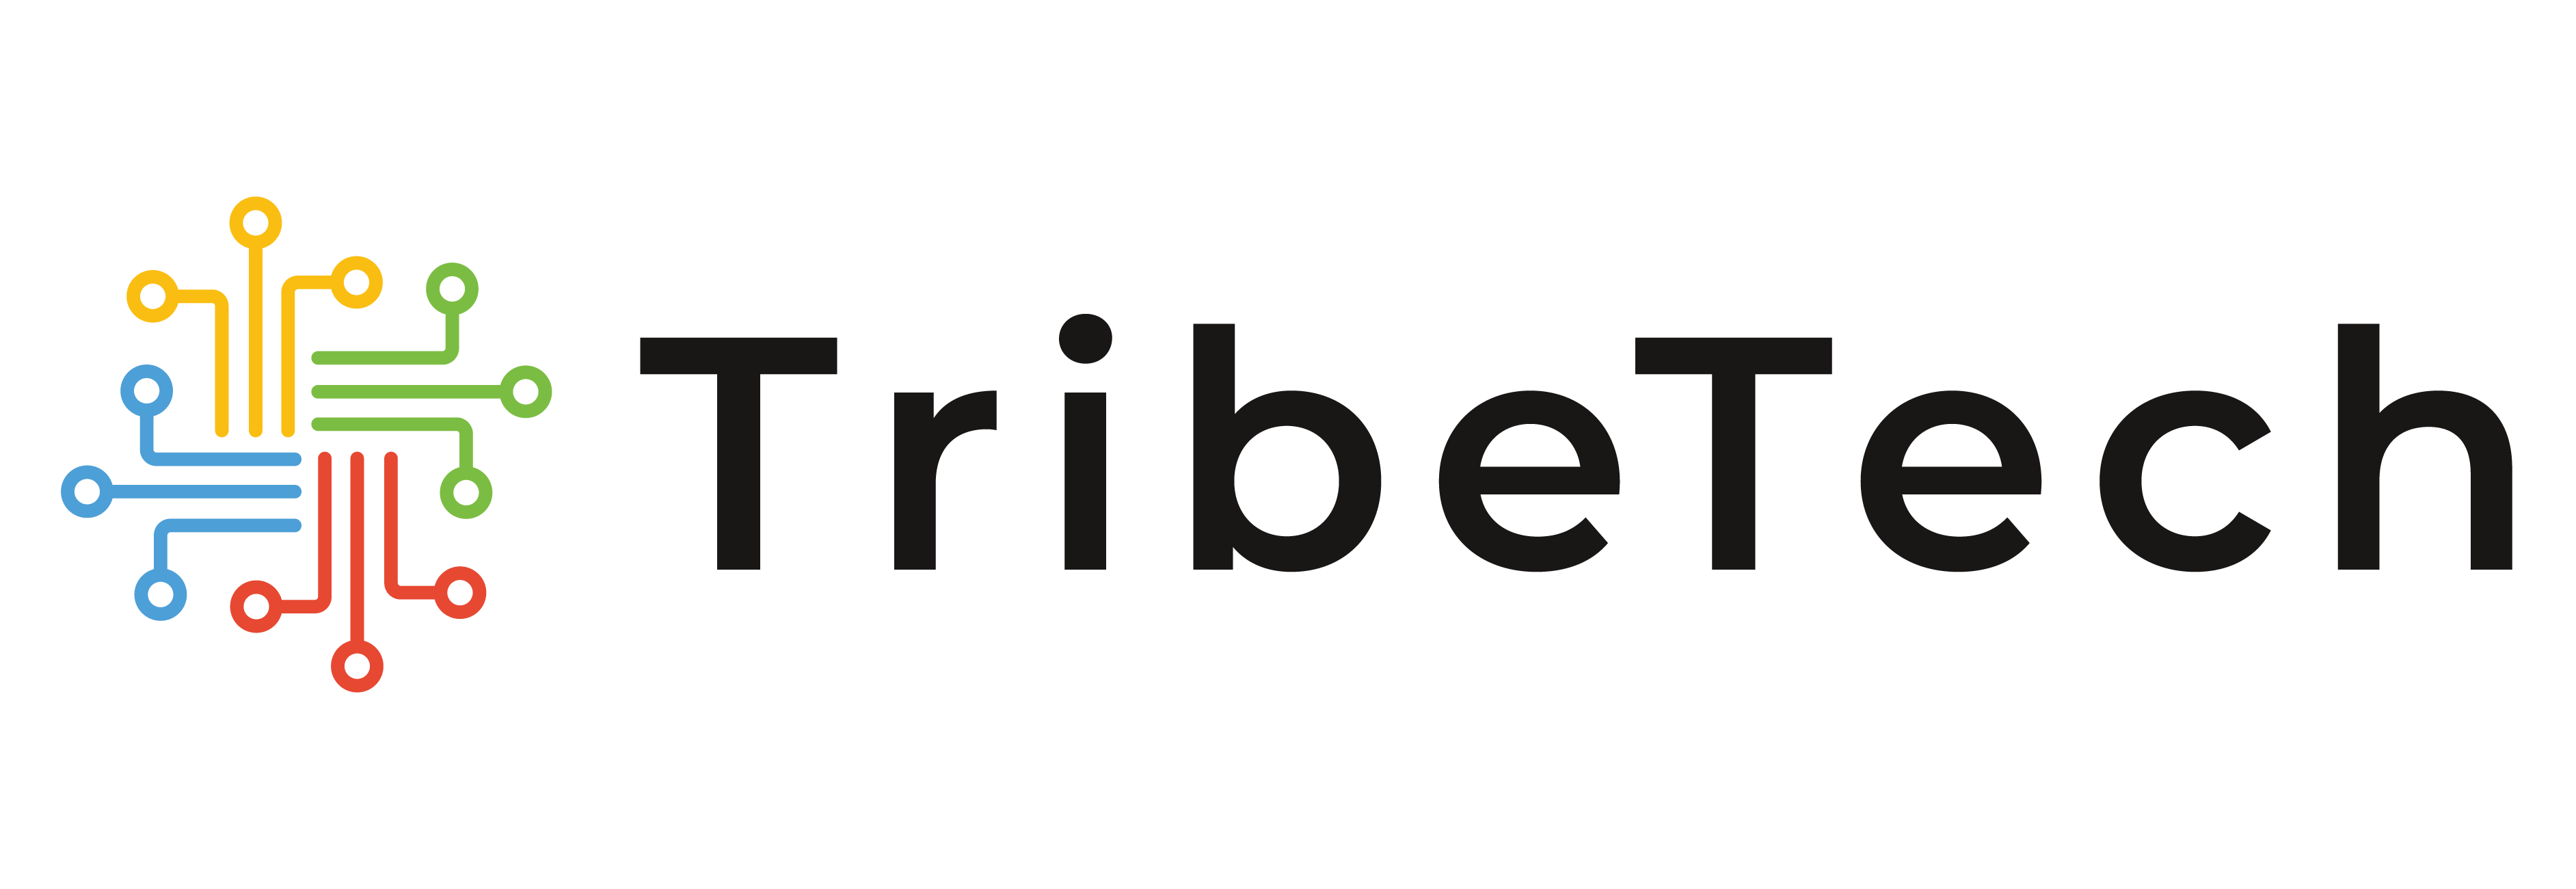 Tribetech Logo MYST Mountain Youth Services Team